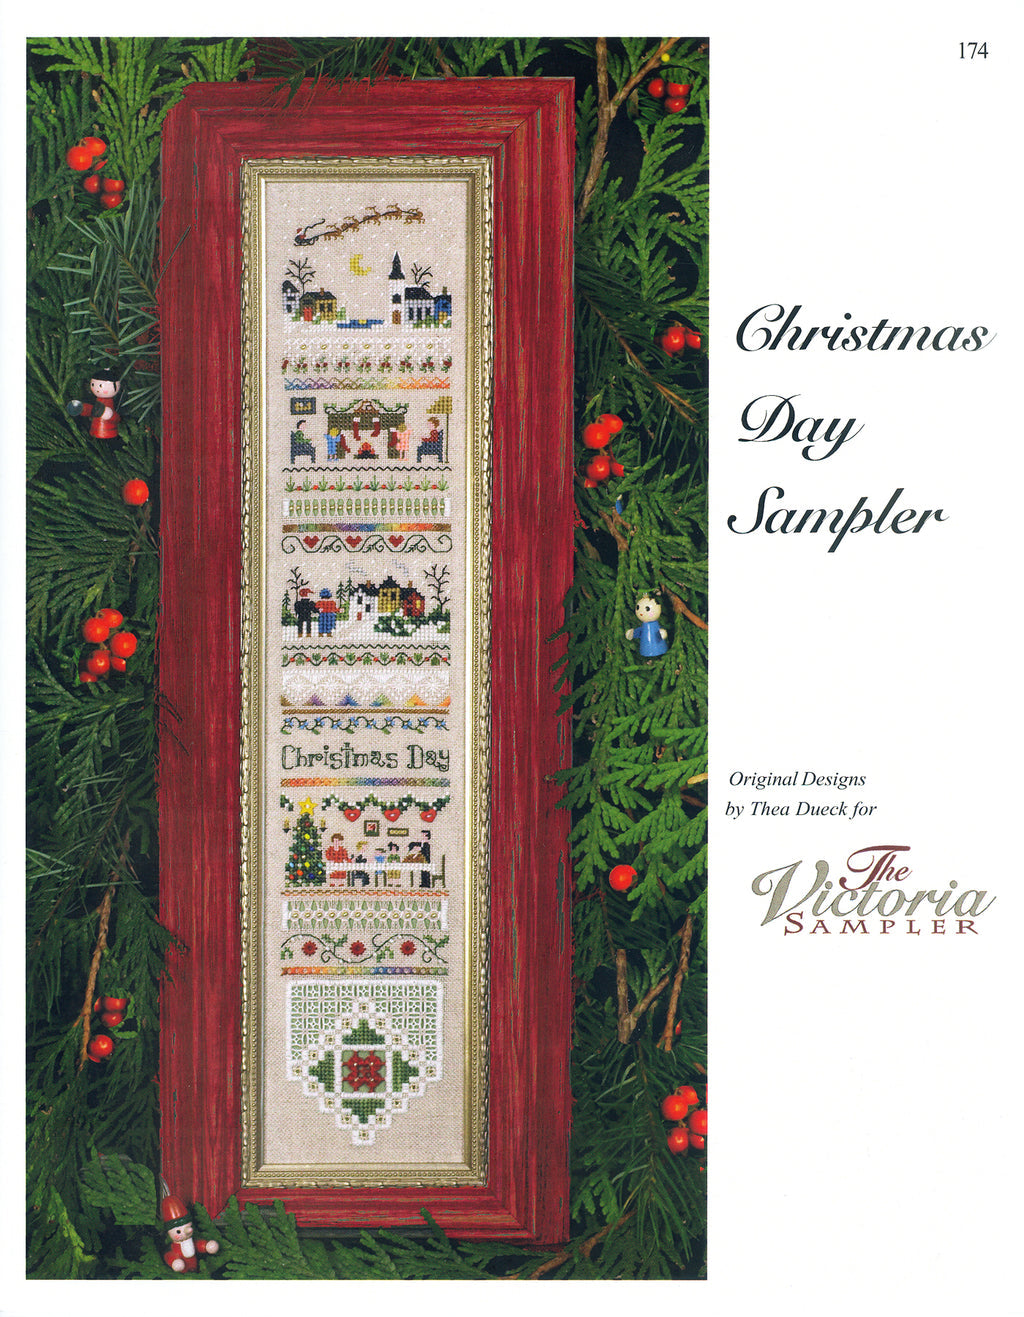 Christmas Day Sampler By The Victoria Sampler 174